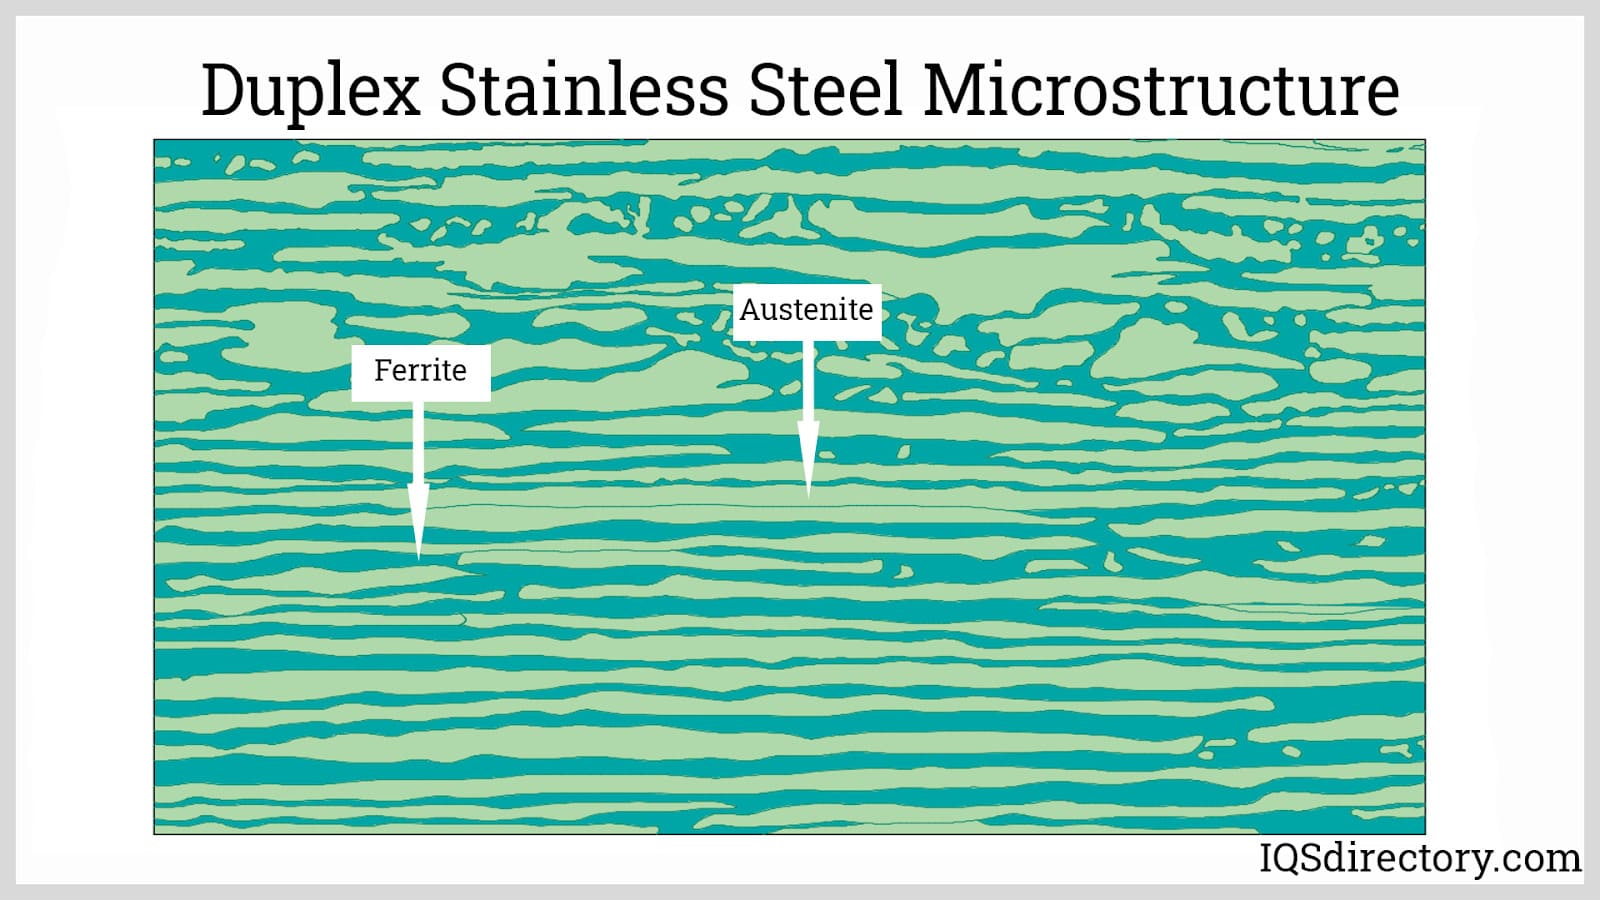 Duplex Stainless Steel Microstructure